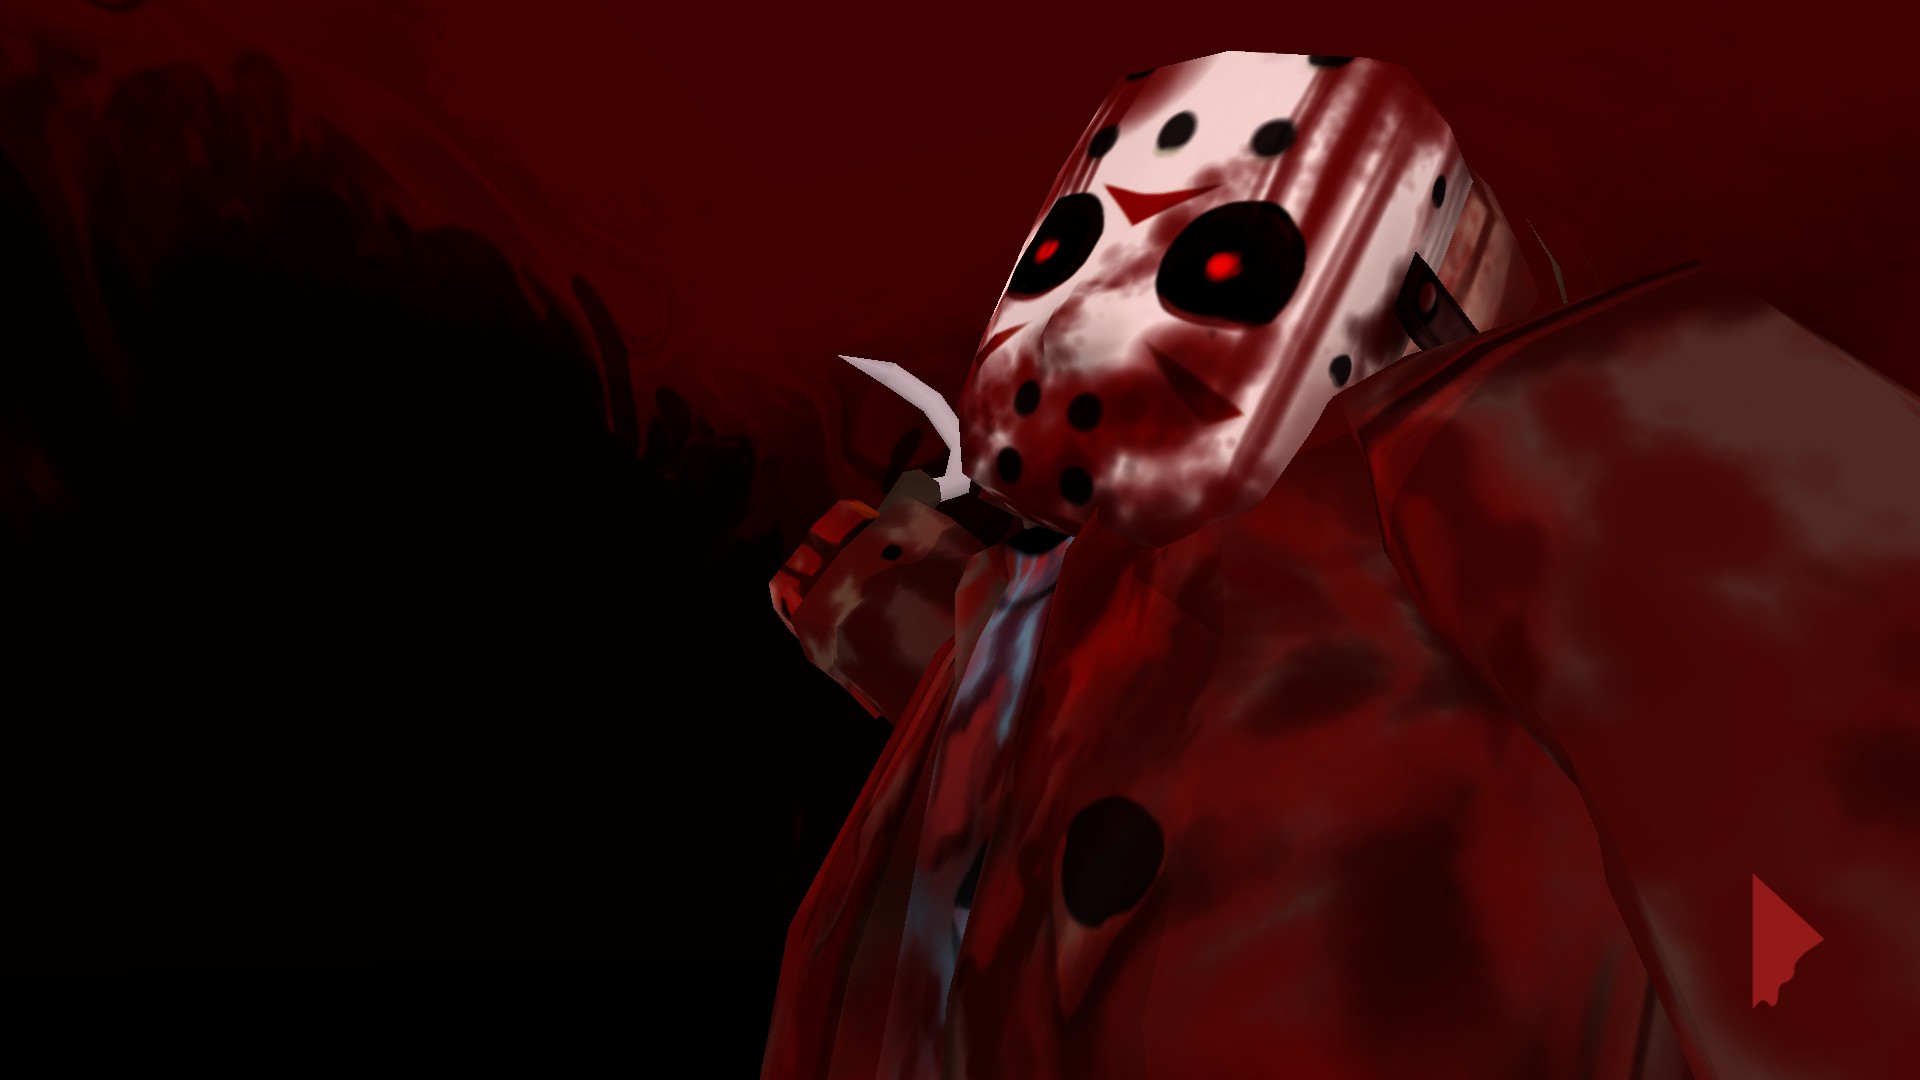 Friday 13 killer puzzle steam фото 64